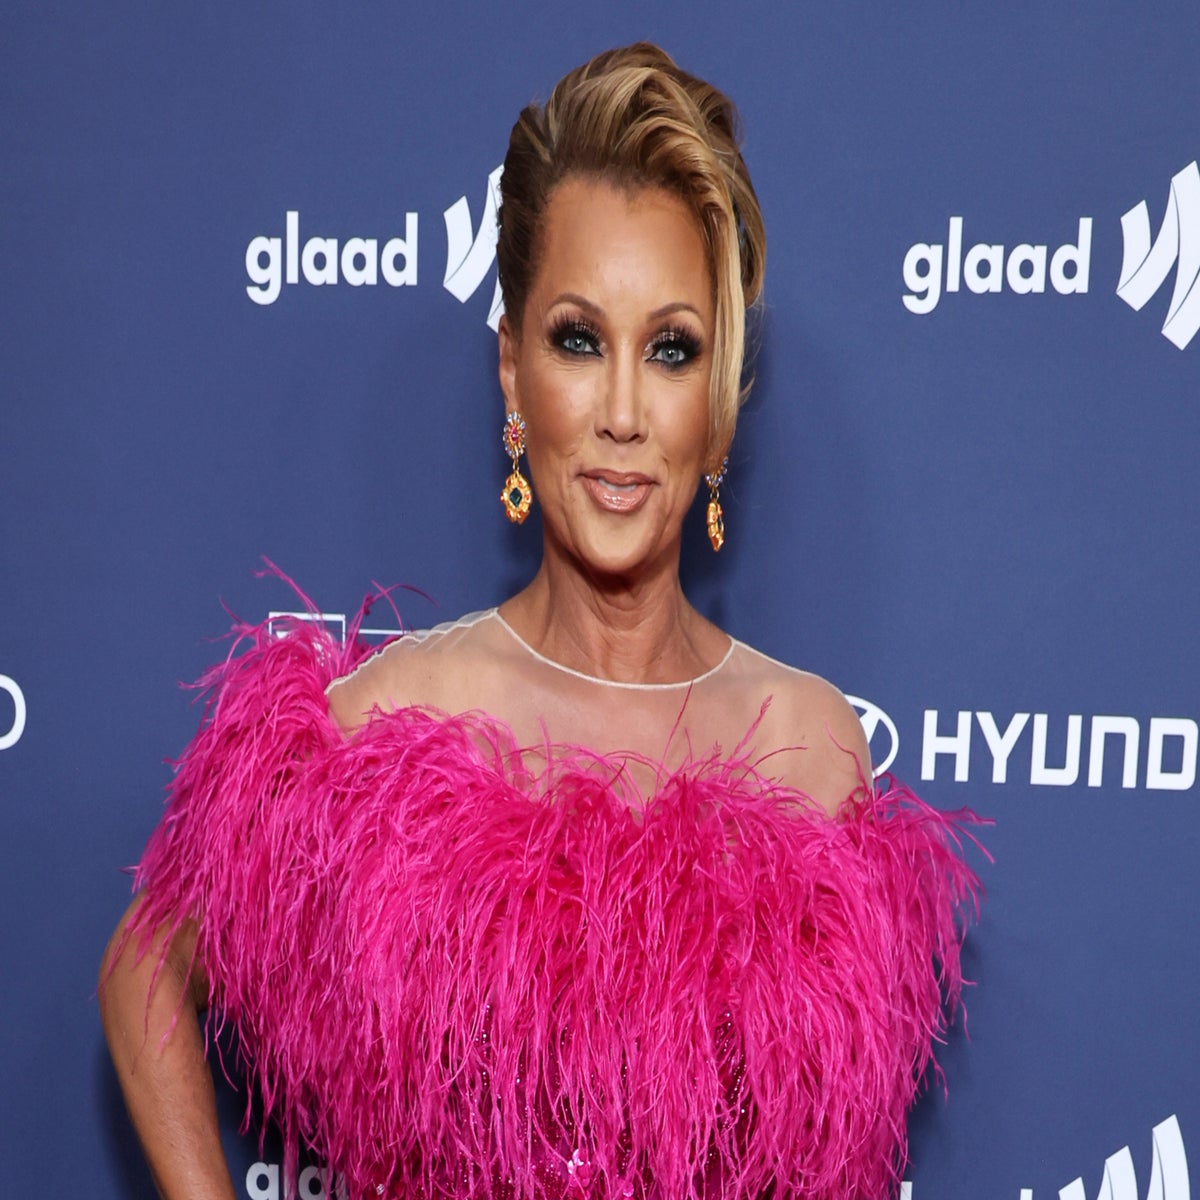 Vanessa Williams says she won't get plastic surgery or fillers